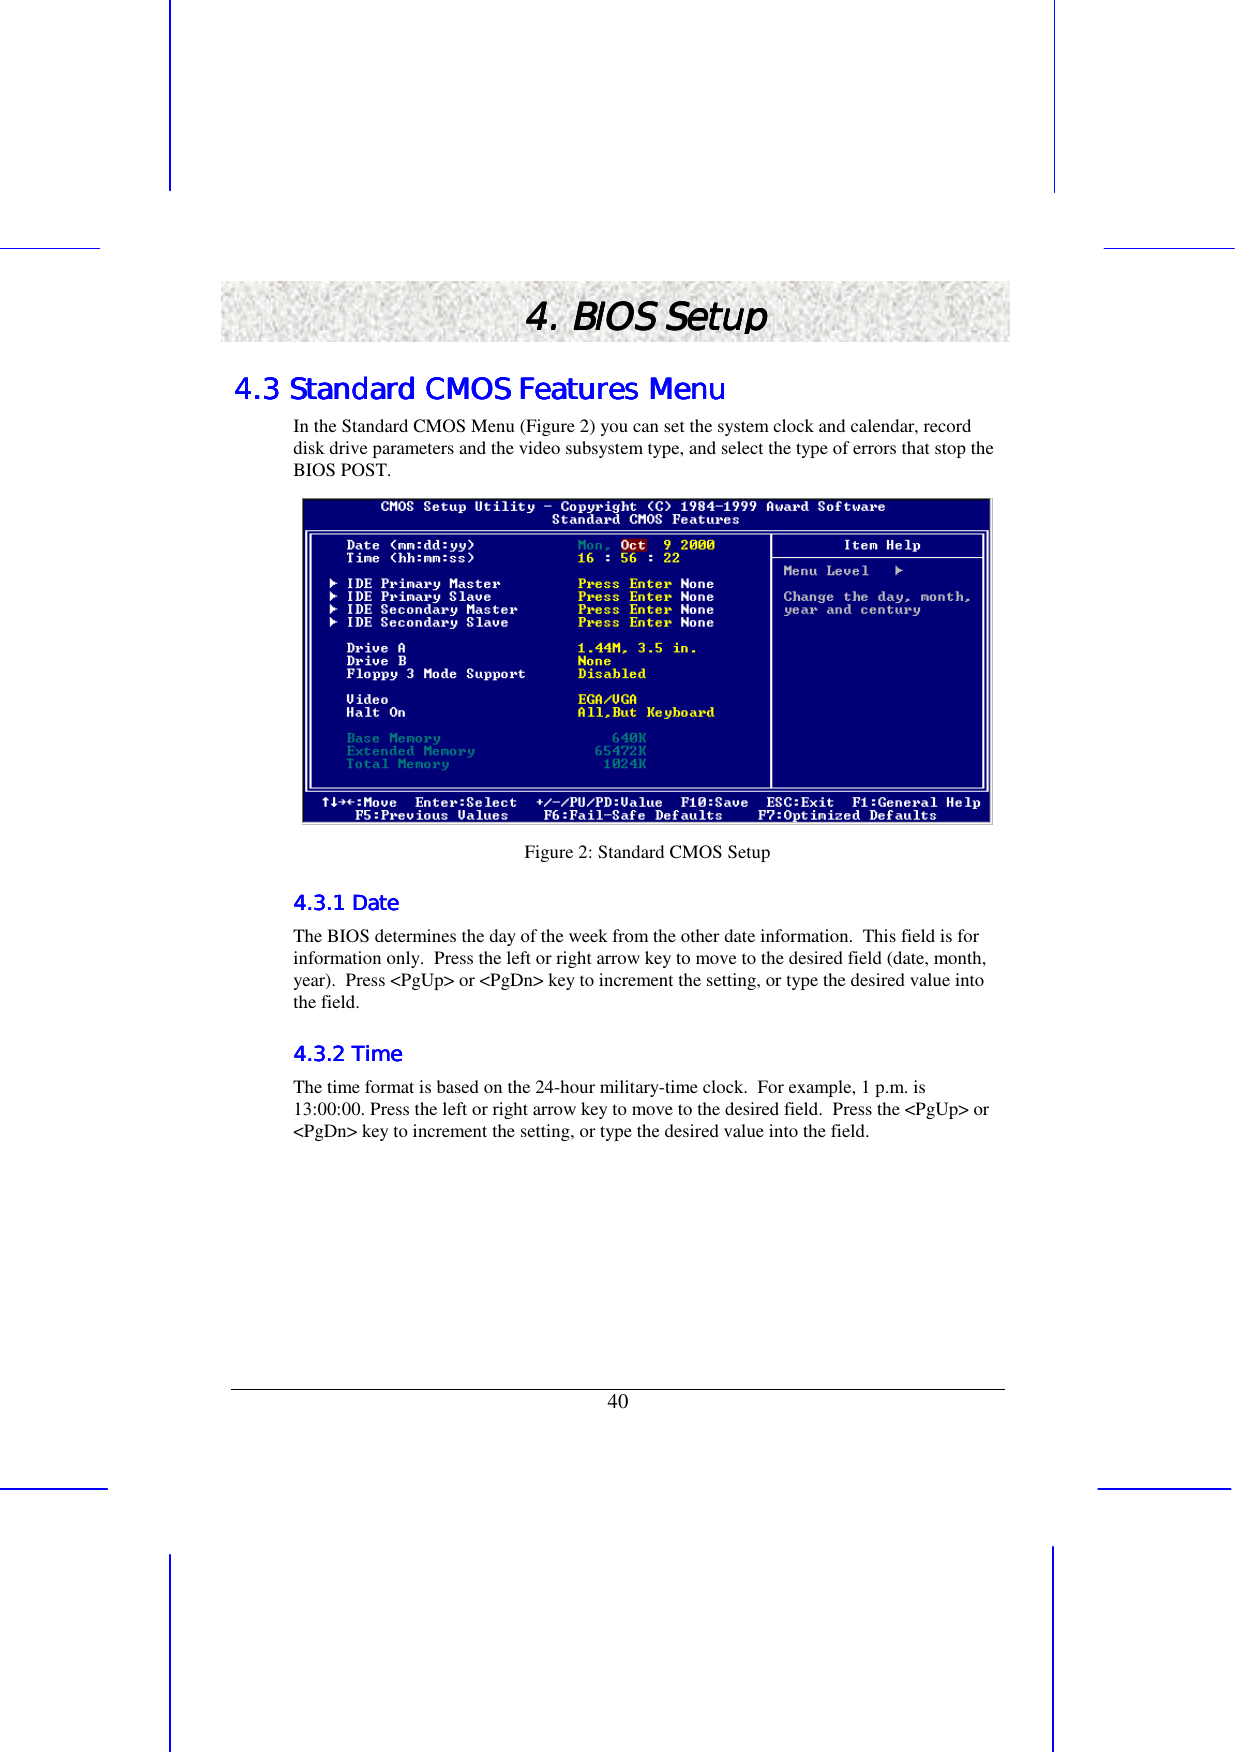   40 4. BIOS Setup4. BIOS Setup4. BIOS Setup4. BIOS Setup    4.3 Standard CMOS Features Menu4.3 Standard CMOS Features Menu4.3 Standard CMOS Features Menu4.3 Standard CMOS Features Menu    In the Standard CMOS Menu (Figure 2) you can set the system clock and calendar, record disk drive parameters and the video subsystem type, and select the type of errors that stop the BIOS POST.  Figure 2: Standard CMOS Setup 4.3.1 Date4.3.1 Date4.3.1 Date4.3.1 Date    The BIOS determines the day of the week from the other date information.  This field is for information only.  Press the left or right arrow key to move to the desired field (date, month, year).  Press &lt;PgUp&gt; or &lt;PgDn&gt; key to increment the setting, or type the desired value into the field. 4.3.2 Time4.3.2 Time4.3.2 Time4.3.2 Time    The time format is based on the 24-hour military-time clock.  For example, 1 p.m. is 13:00:00. Press the left or right arrow key to move to the desired field.  Press the &lt;PgUp&gt; or &lt;PgDn&gt; key to increment the setting, or type the desired value into the field. 